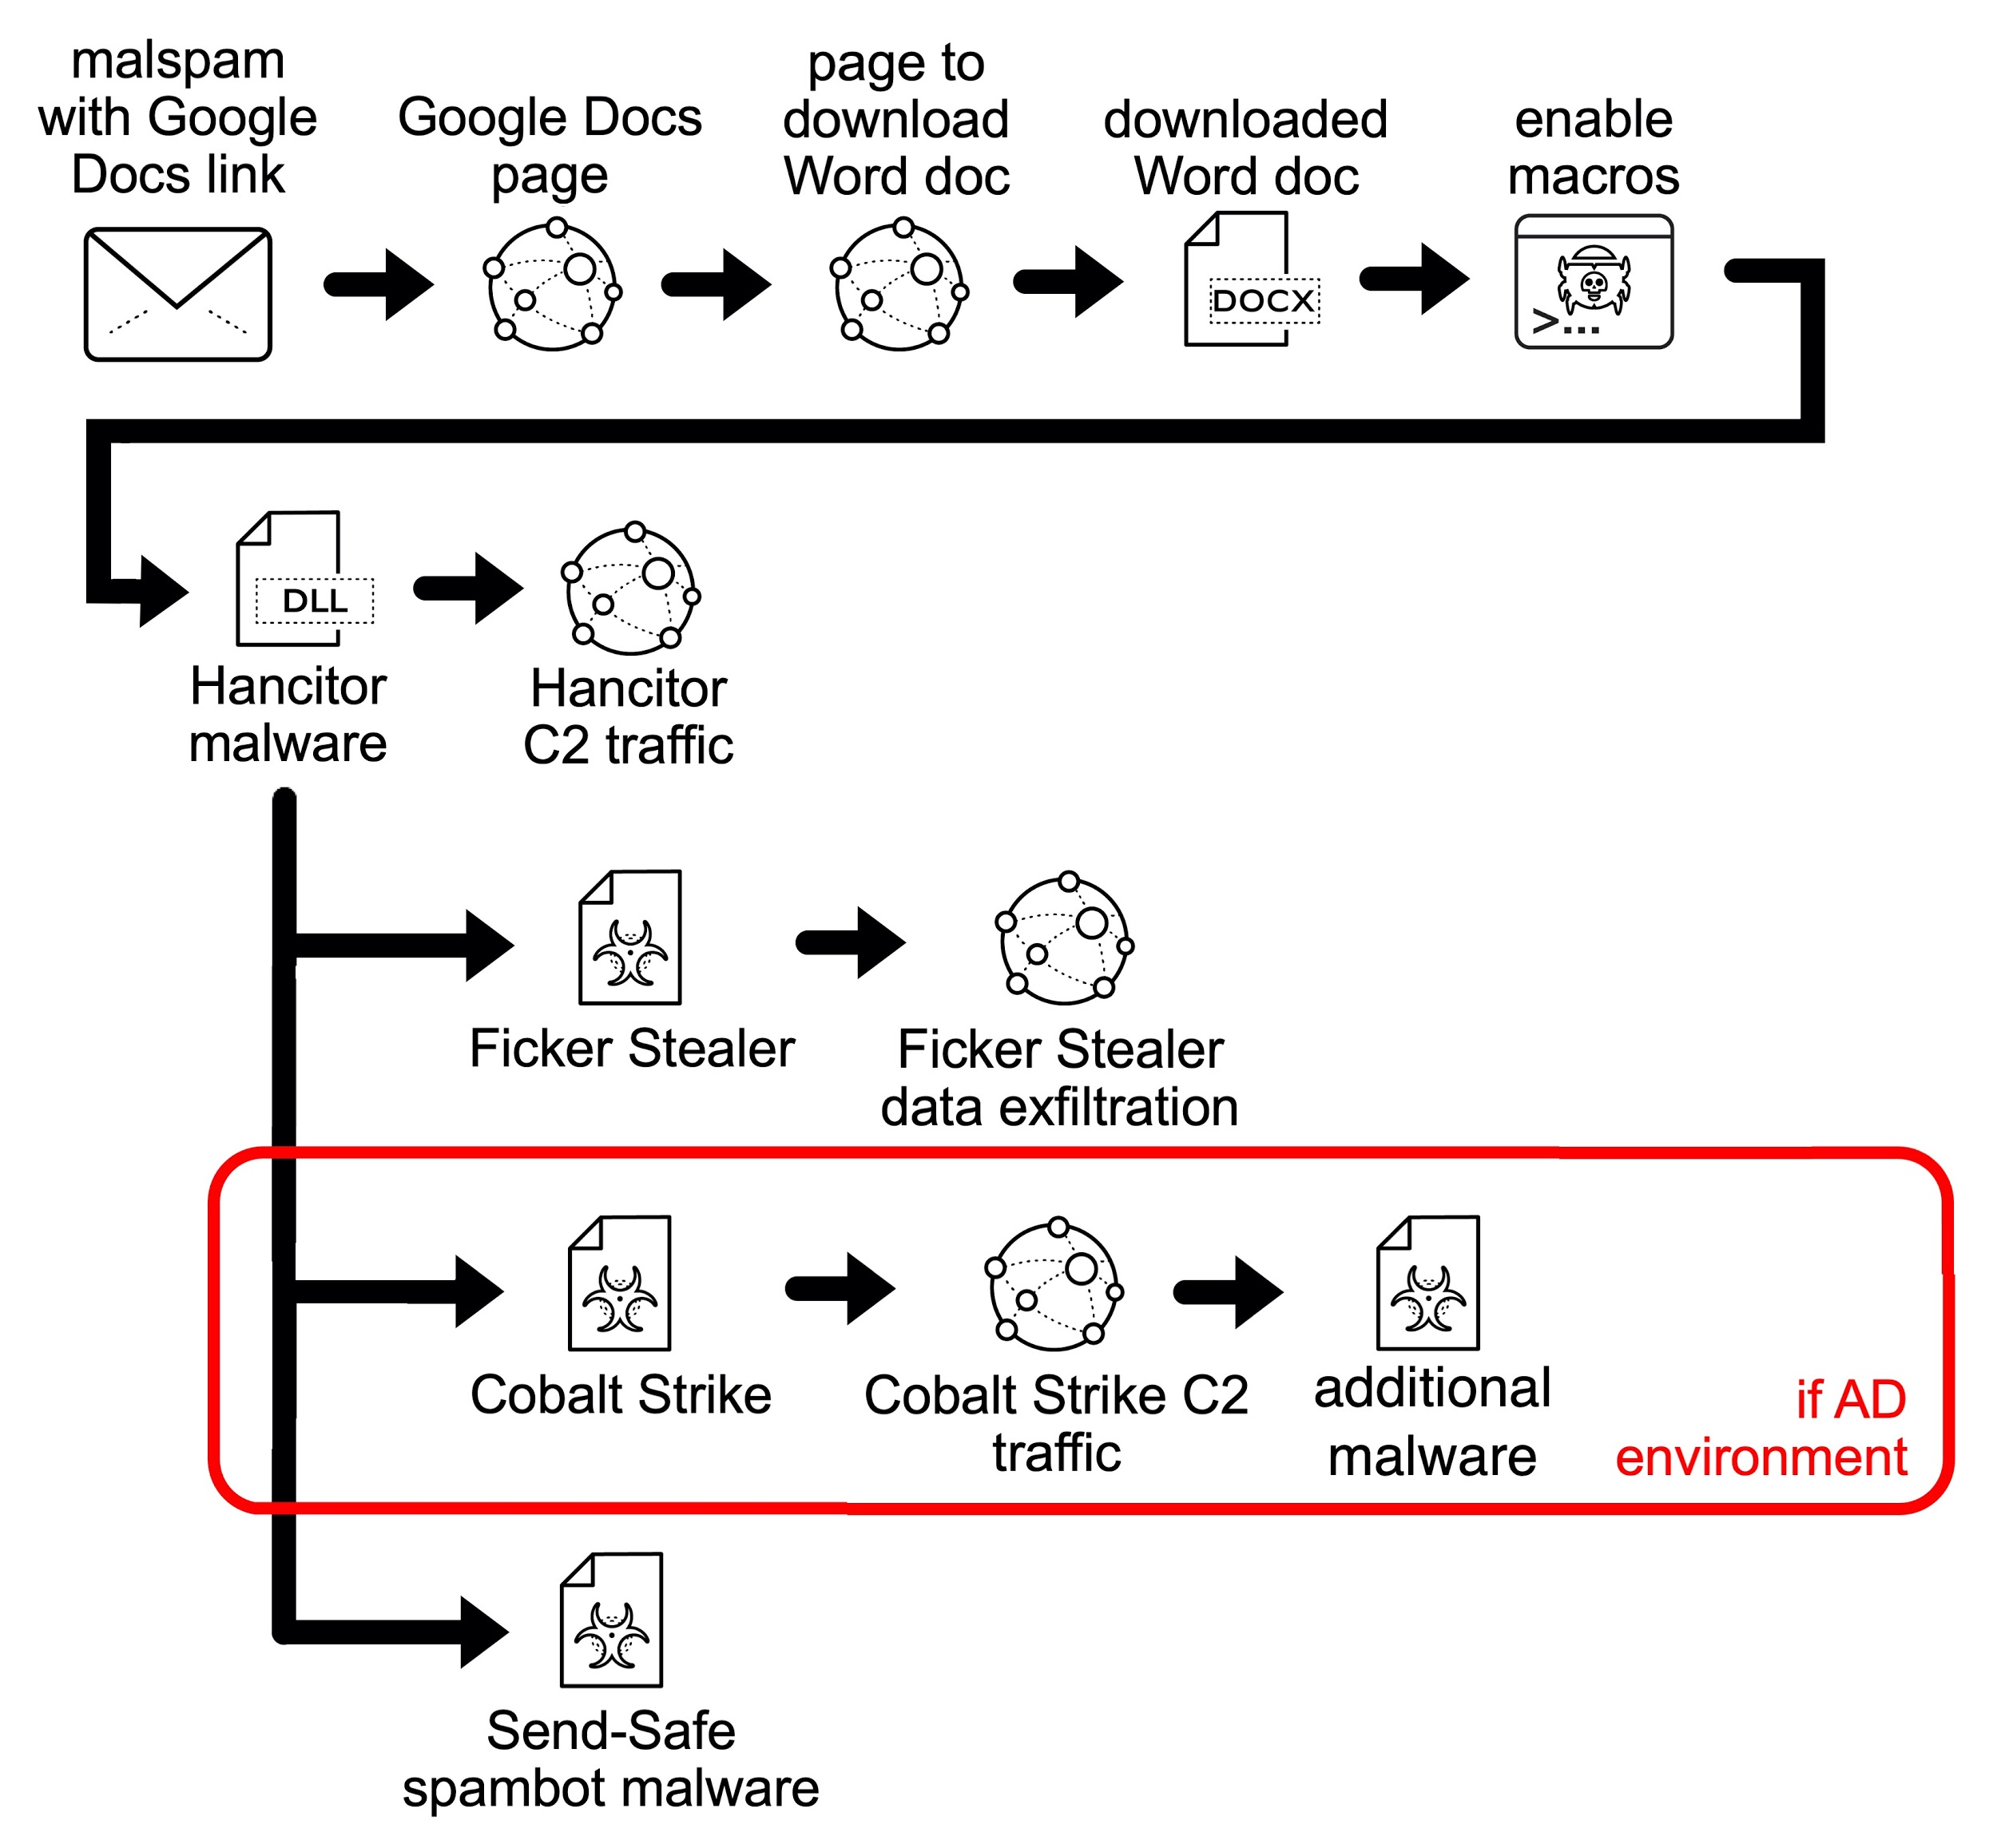 The chain of events for recent Hancitor infections includes malspam with a Google Docs link, a Google Docs page, a page to download a Word doc, a downloaded Word doc, enabling macros, Hancitor malware, Hancitor C2 traffic, Ficker Stealer and Ficker Stealer data exfiltration. In AD environments, it also includes Cobalt Strike, Cobalt Strike C2 traffic and additional malware. Hancitor infections can also lead to Send-Safe spambot malware, as detailed in the flow chart shown. 